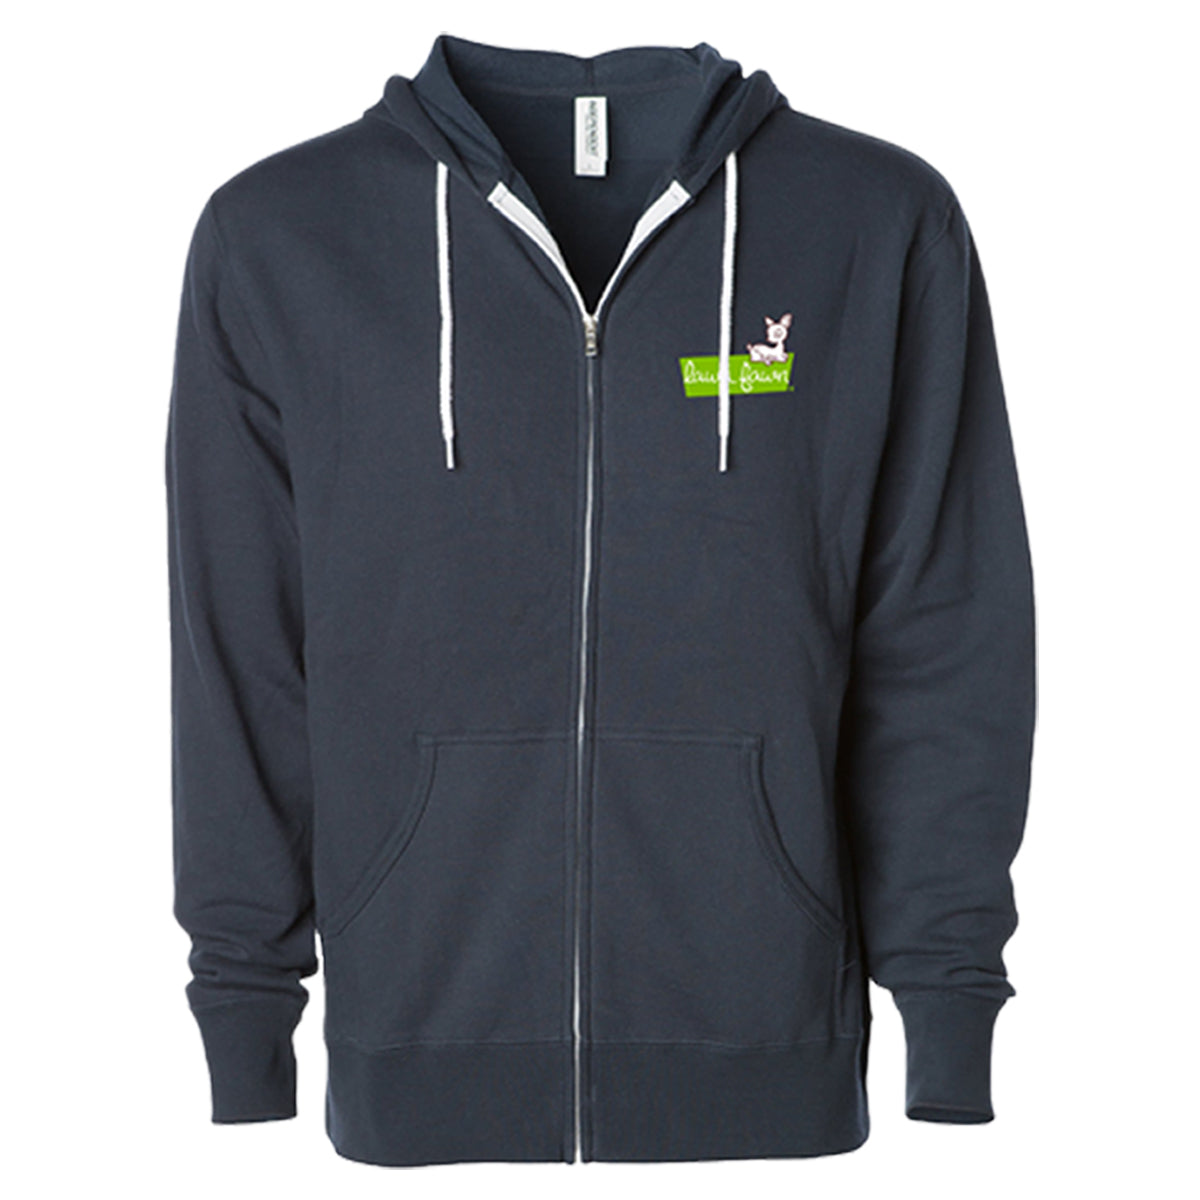 lawn fawn zip-up hoodie - small